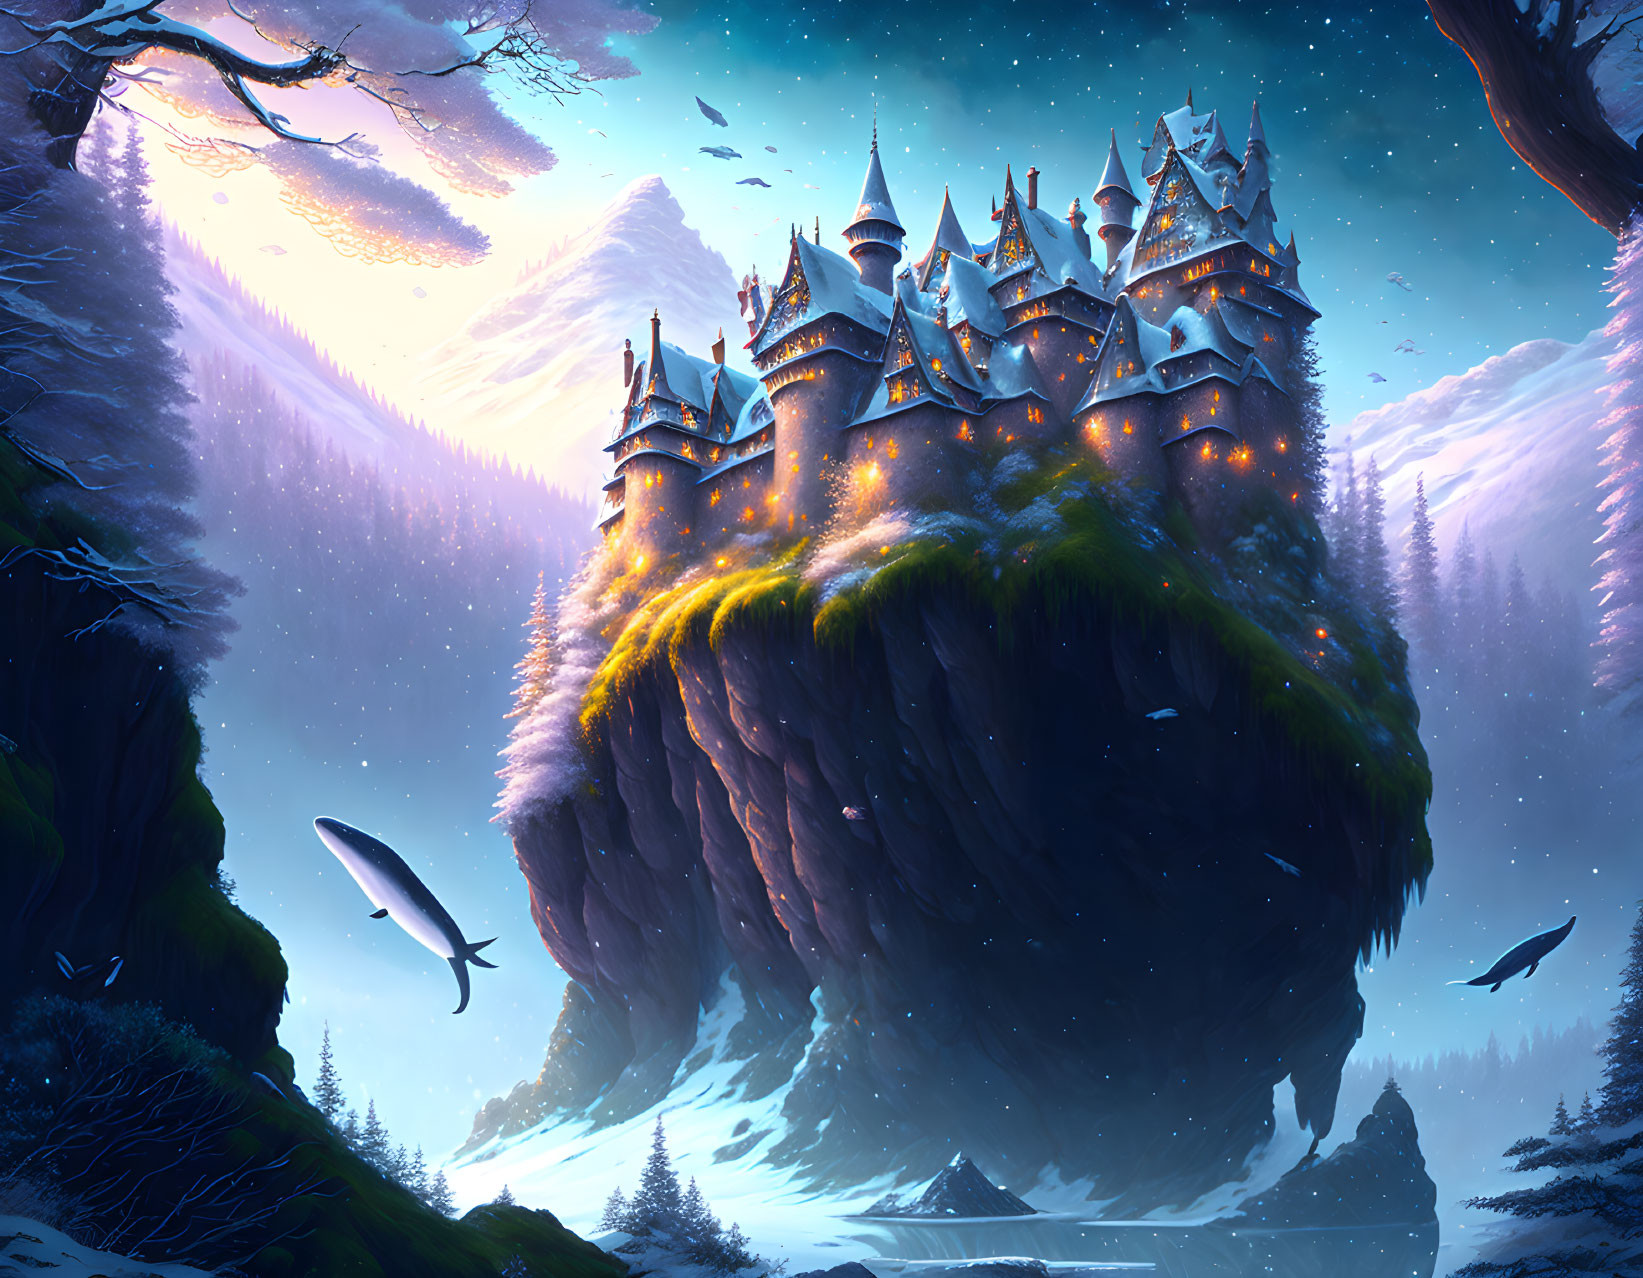 Enchanting castle on floating island with glowing edges, snow-covered trees, flying whales, and icy